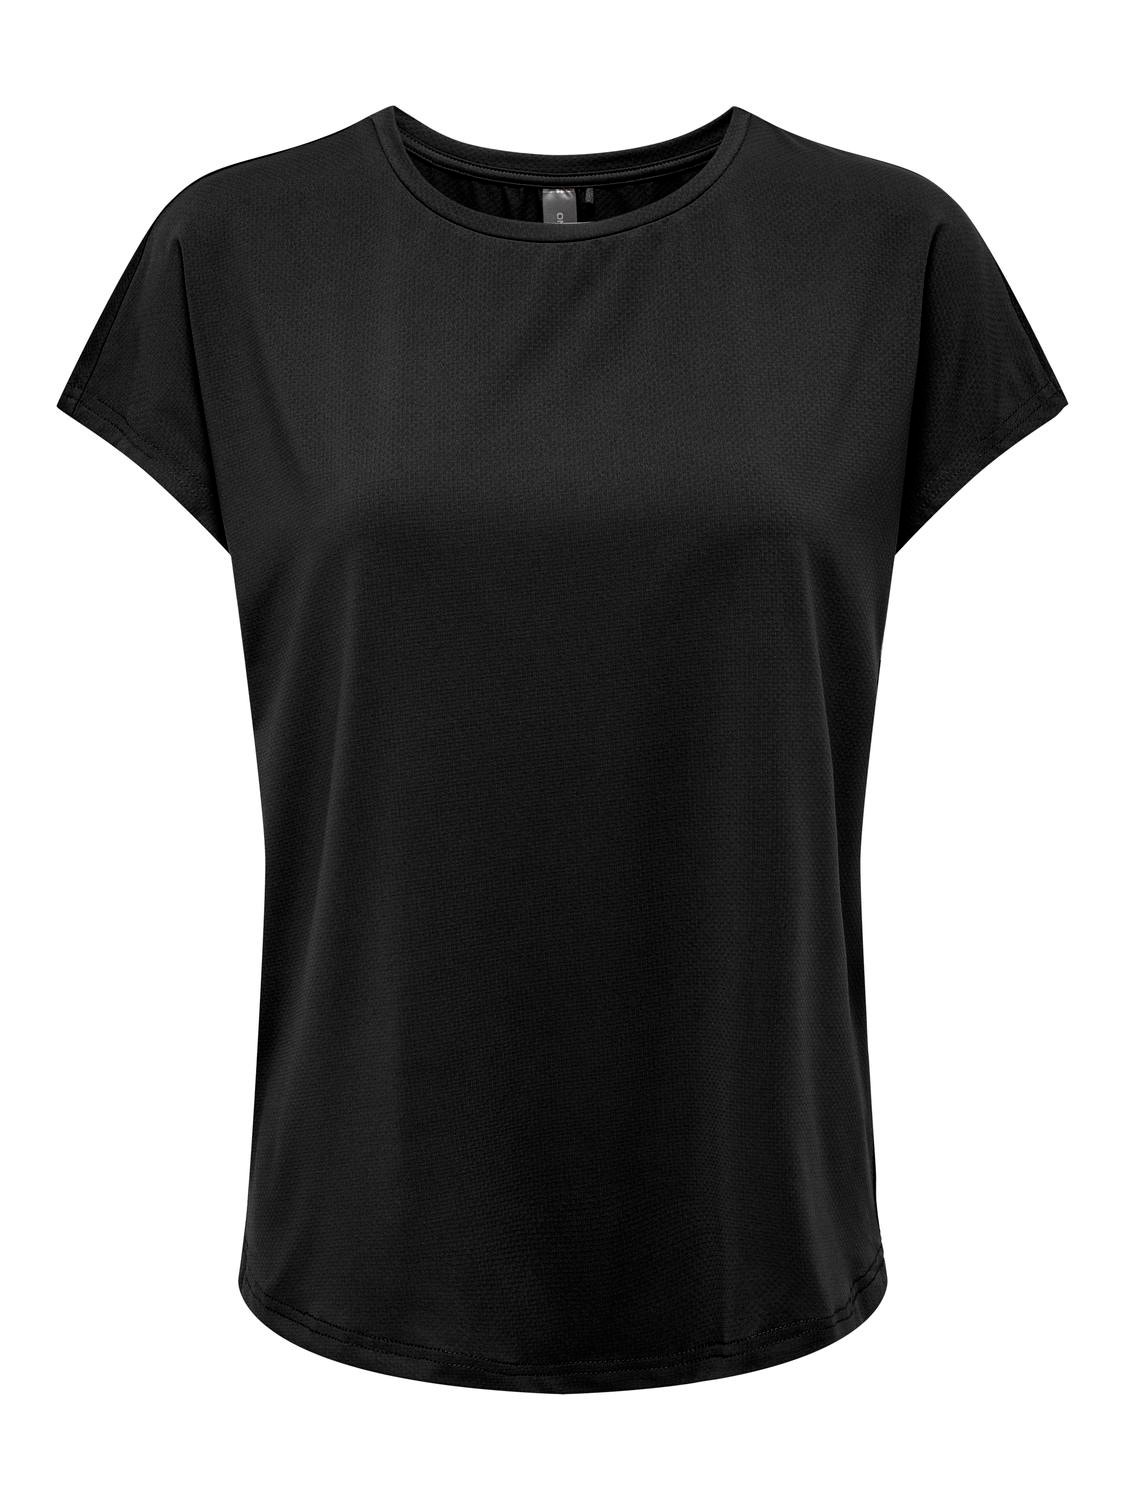 ONLY Loose Fit Round Neck Batwing sleeves T-Shirt -Black - 15311799